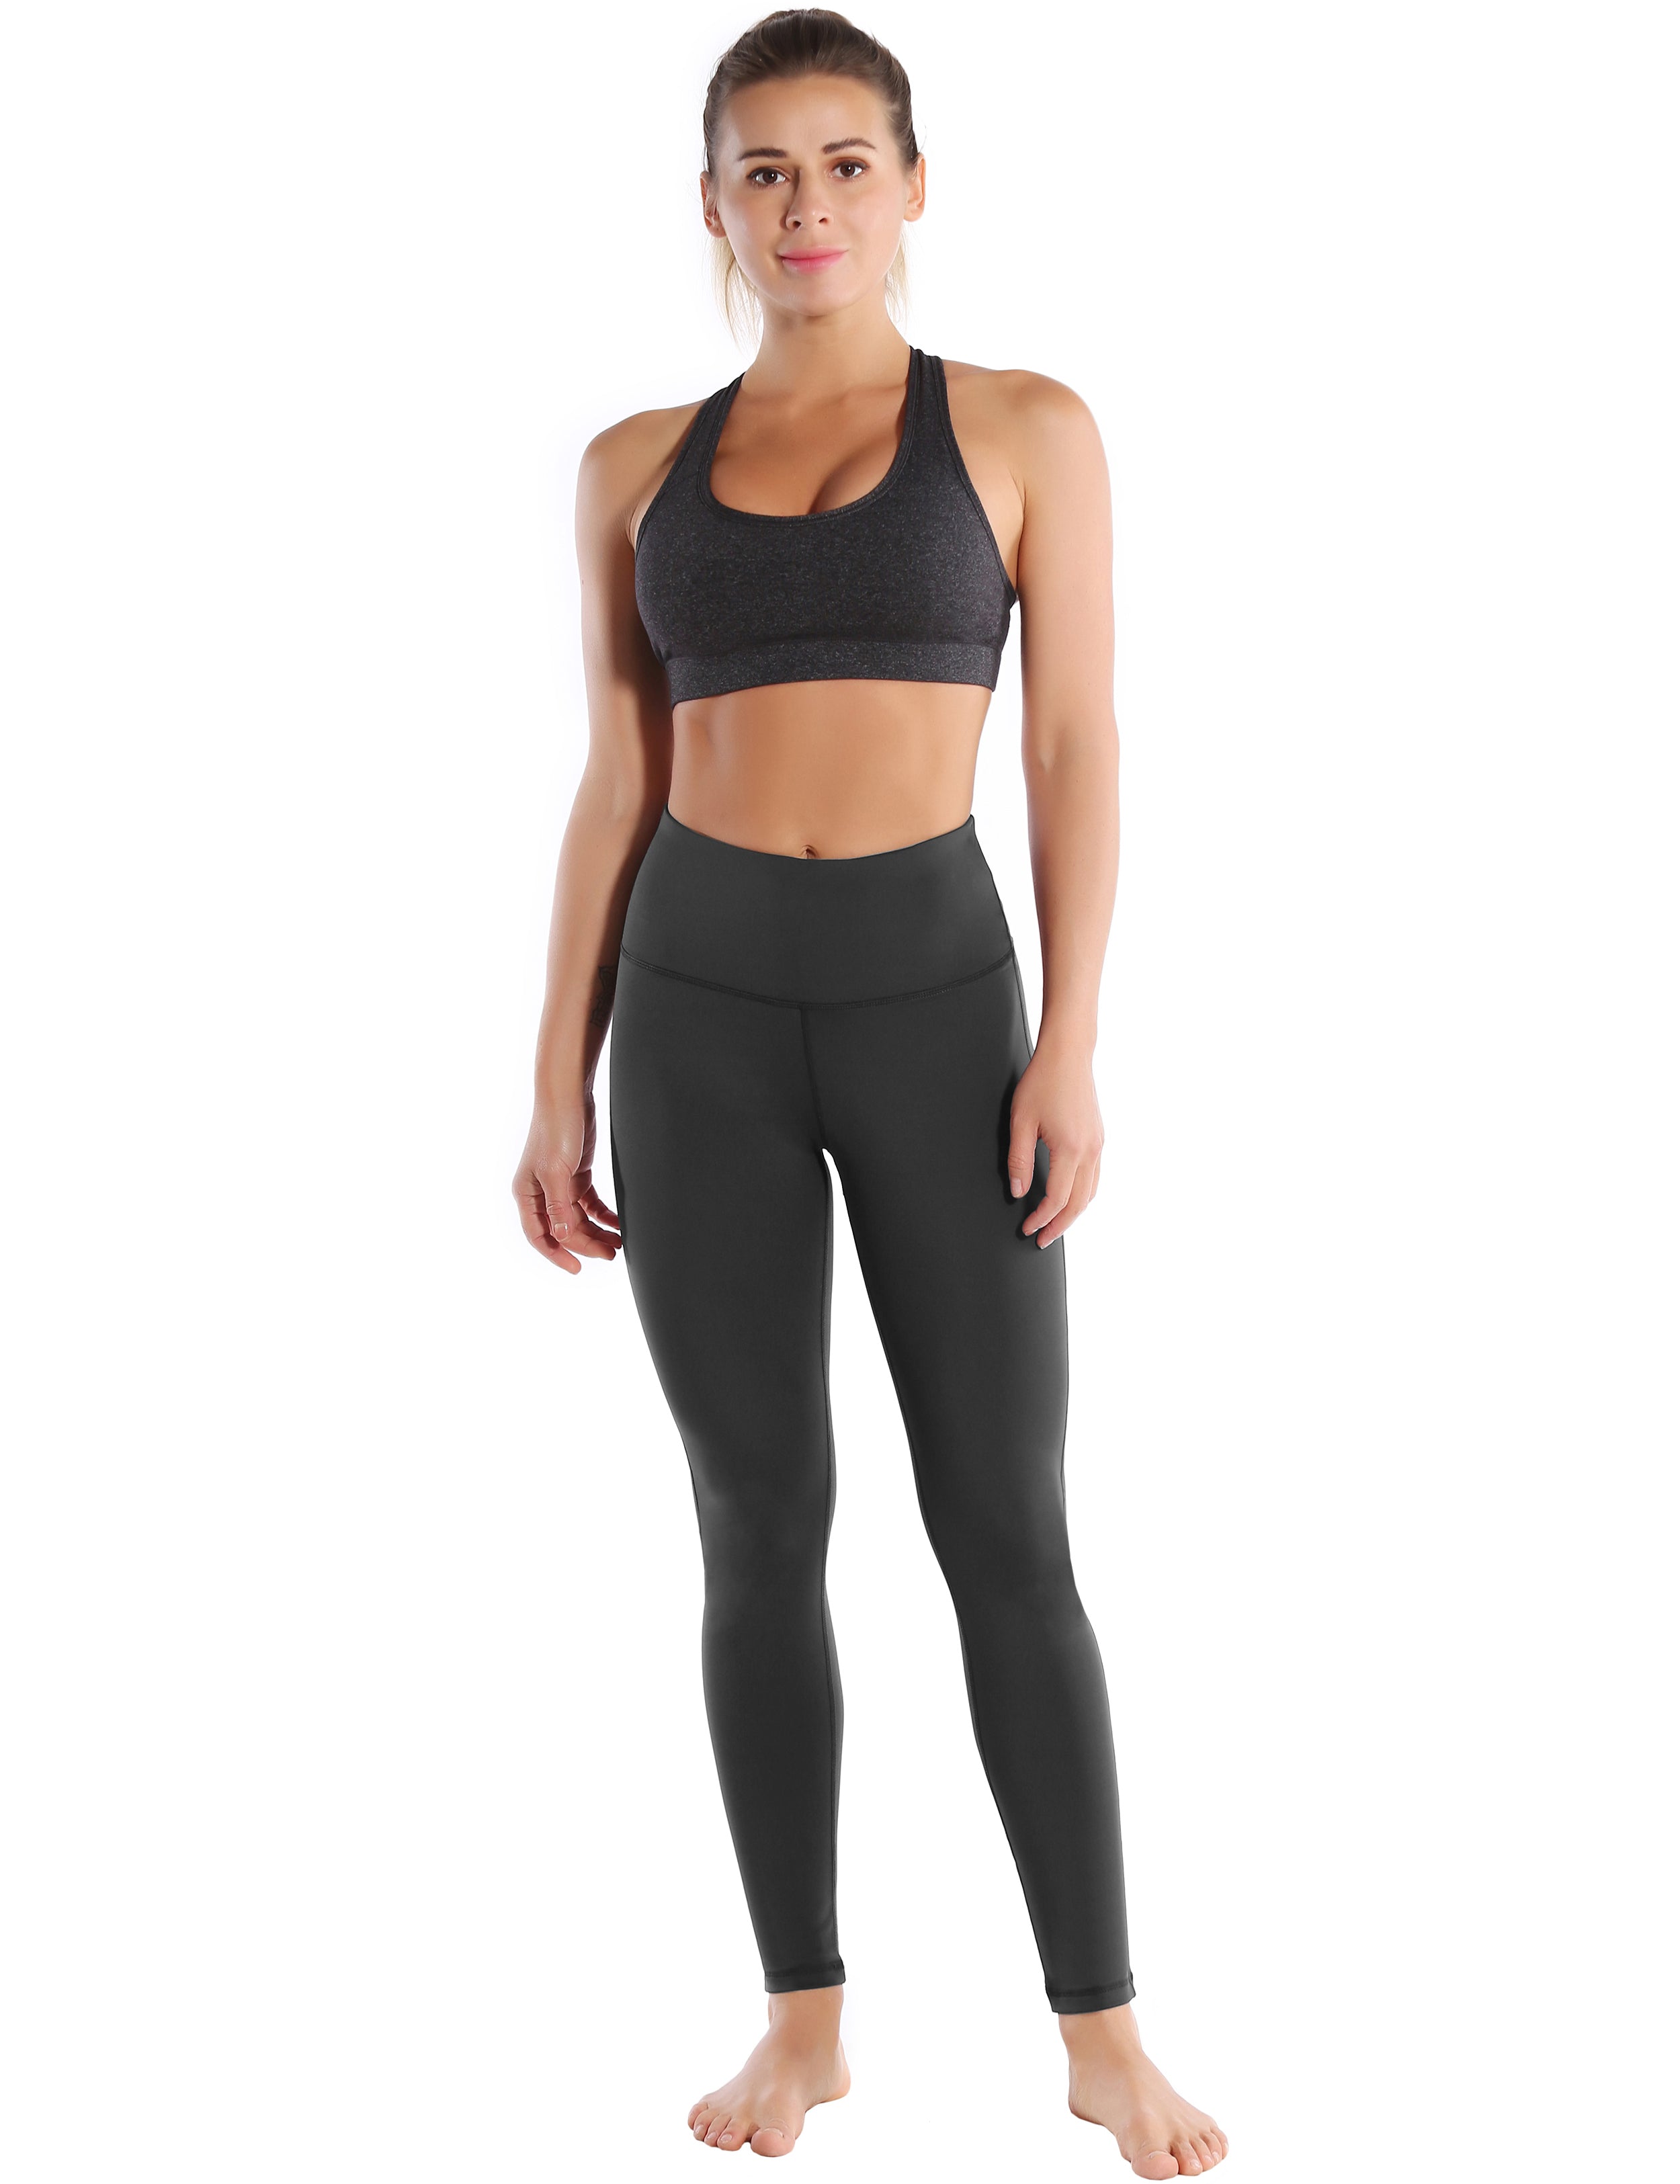 High Waist Side Line Jogging Pants shadowcharcoal Side Line is Make Your Legs Look Longer and Thinner 75%Nylon/25%Spandex Fabric doesn't attract lint easily 4-way stretch No see-through Moisture-wicking Tummy control Inner pocket Two lengths